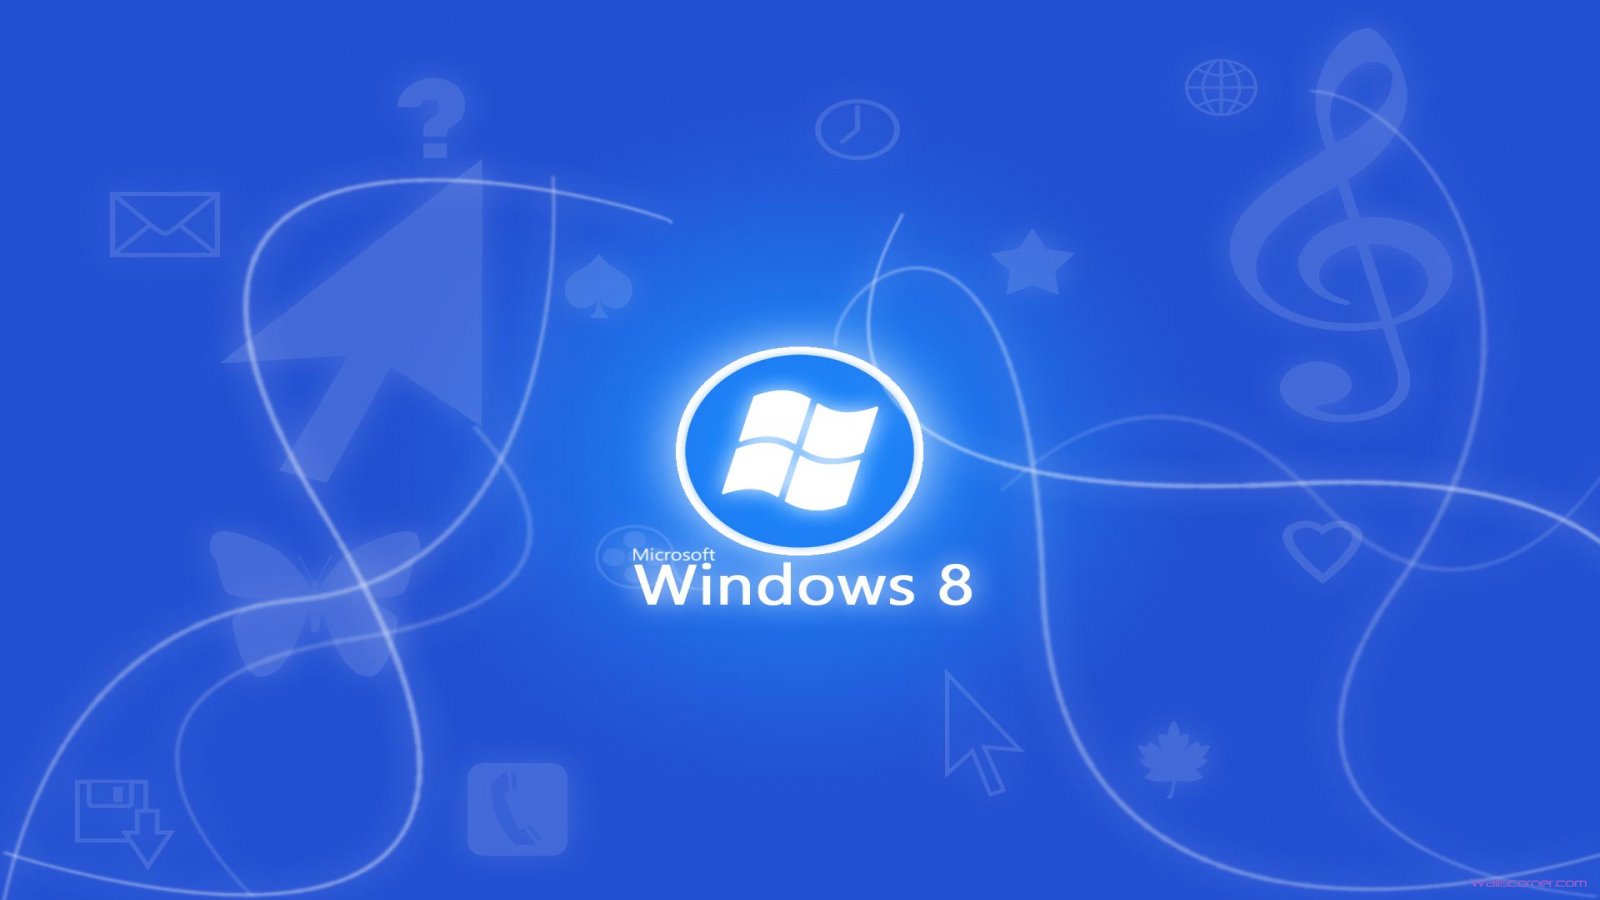 resolutions of windows 8 metro style by vinis13 png beauty windows